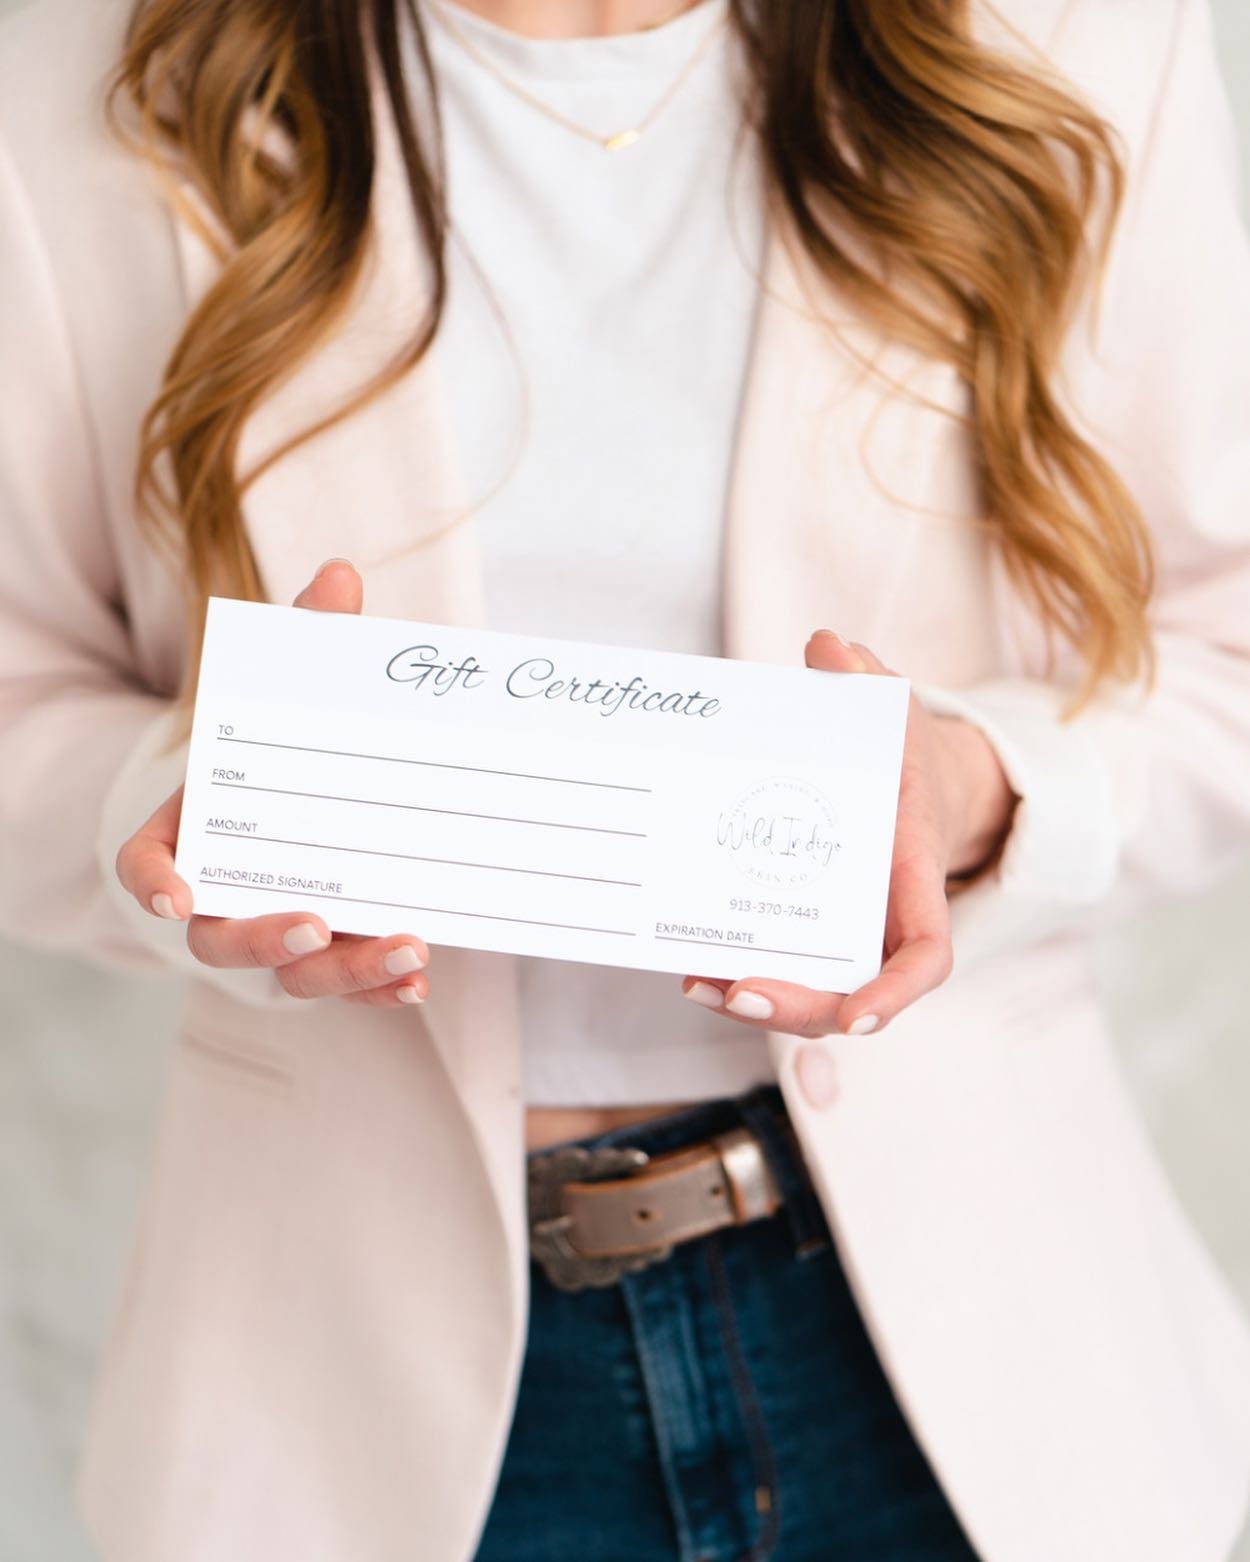 This gift card is my jam&hellip; facials &hellip;. Yes! I actually got one for my daughter and she loved it! I loved all the content we created for @wildindigoskinco. Not only did we create marketing content for her services and personal branding but